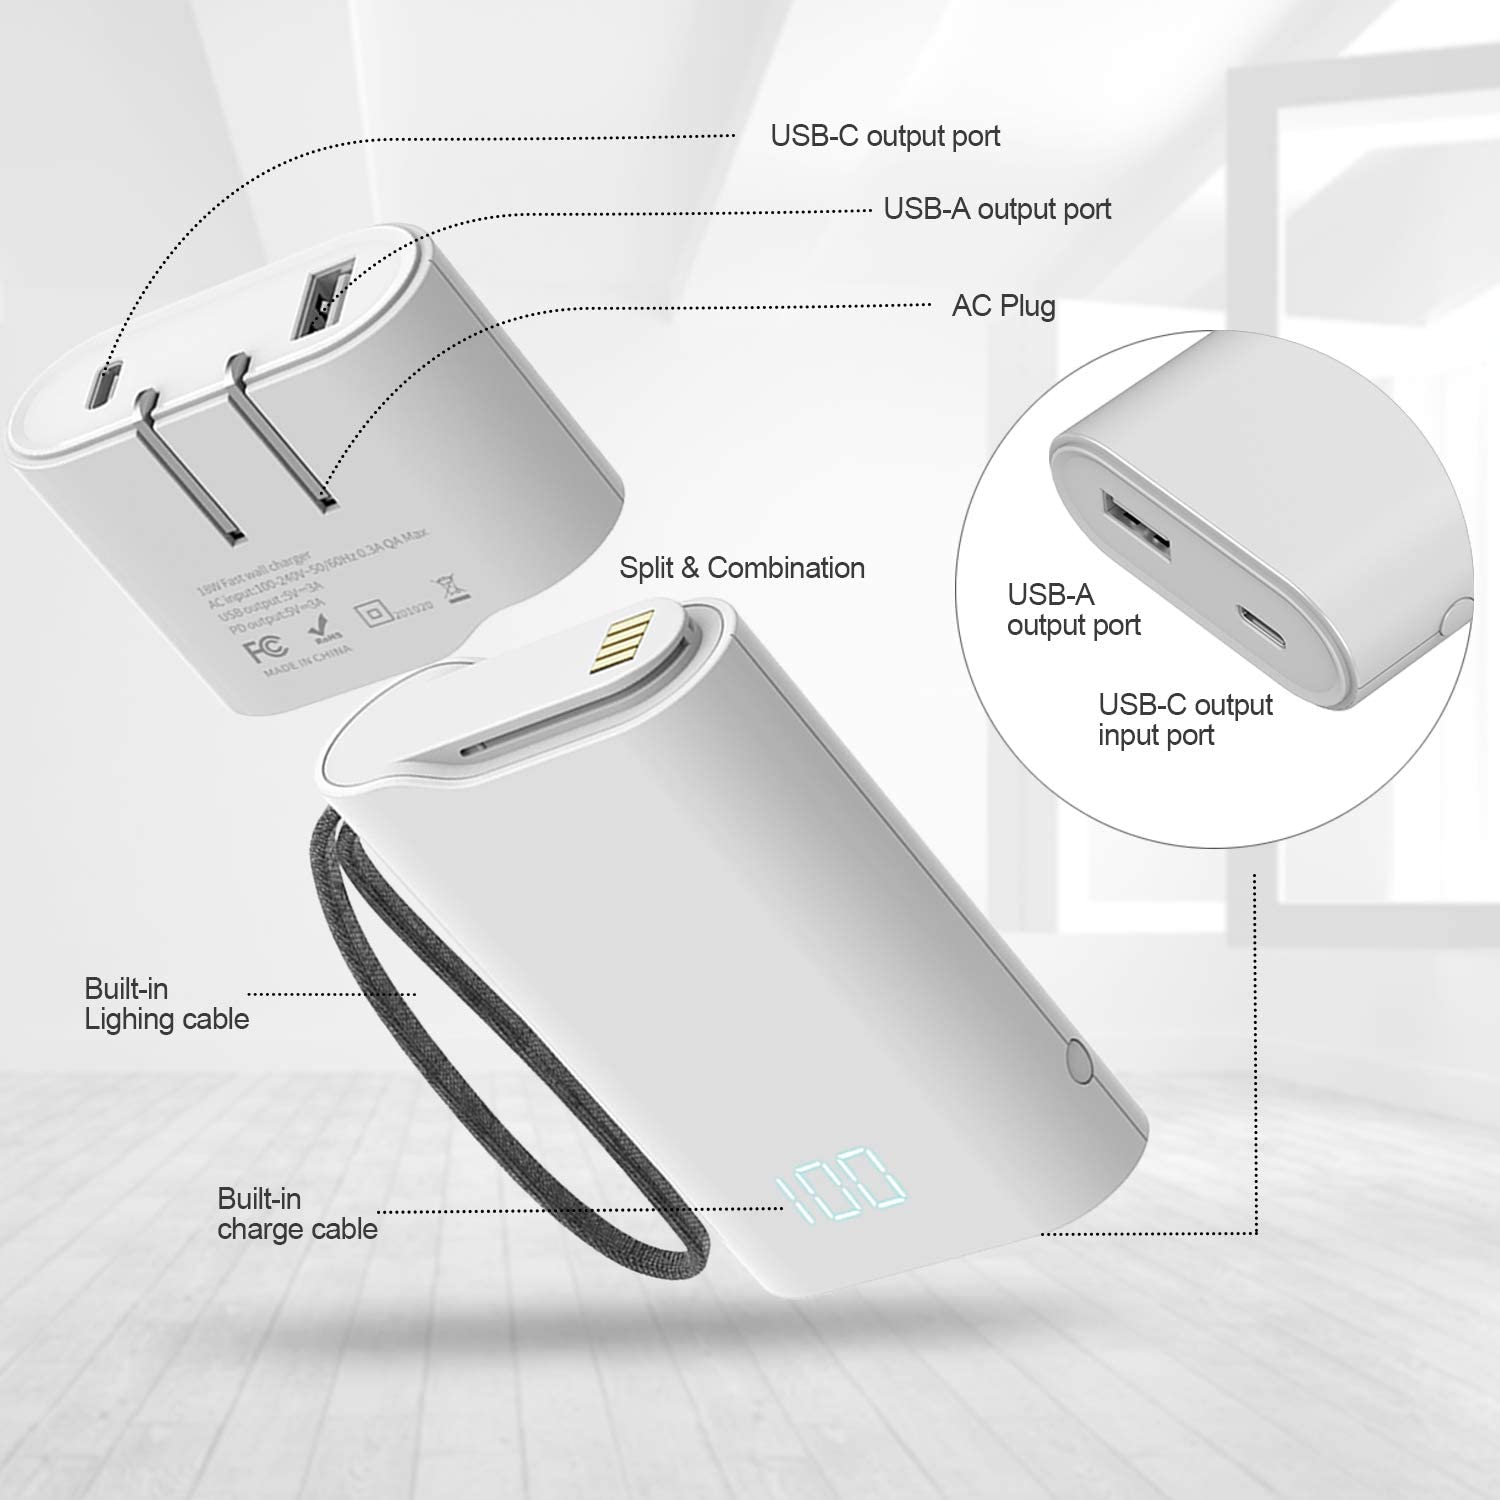 Removable 45W  AC Power Bank 10000mAh,Quick Charge USB C High-Speed Portable Charger Heloideo